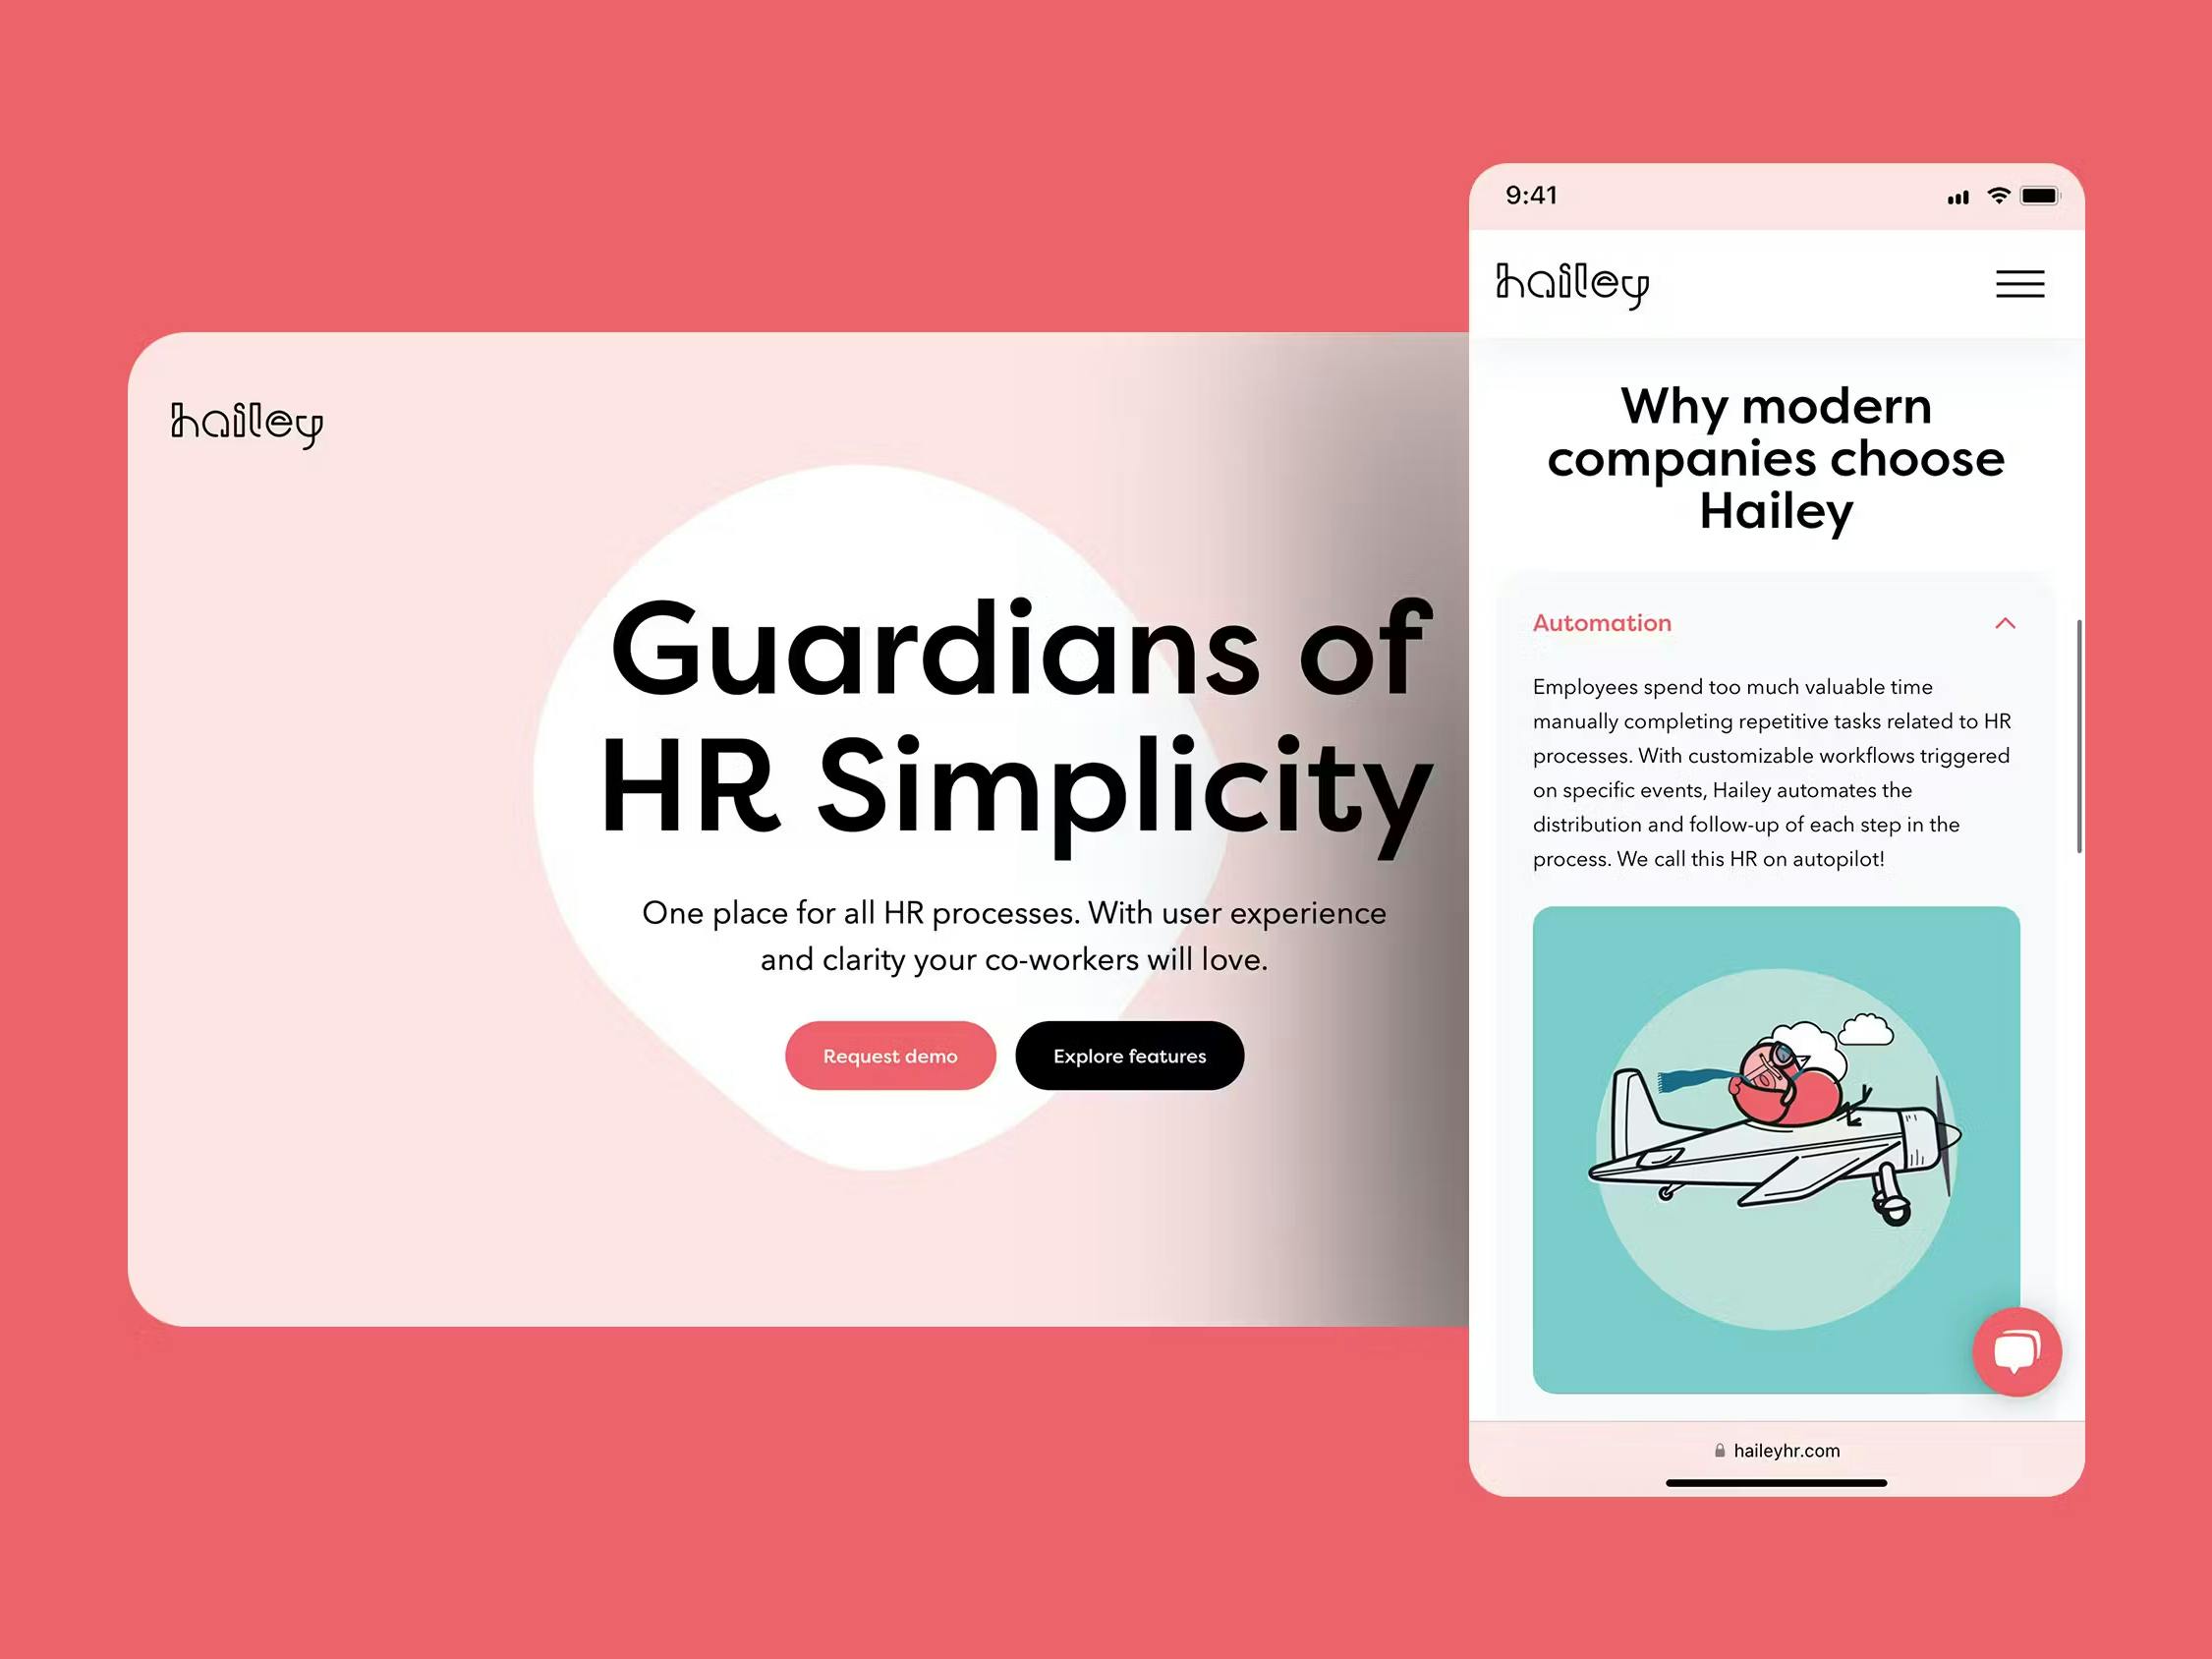 Hailey - Guardians of HR Simplicity